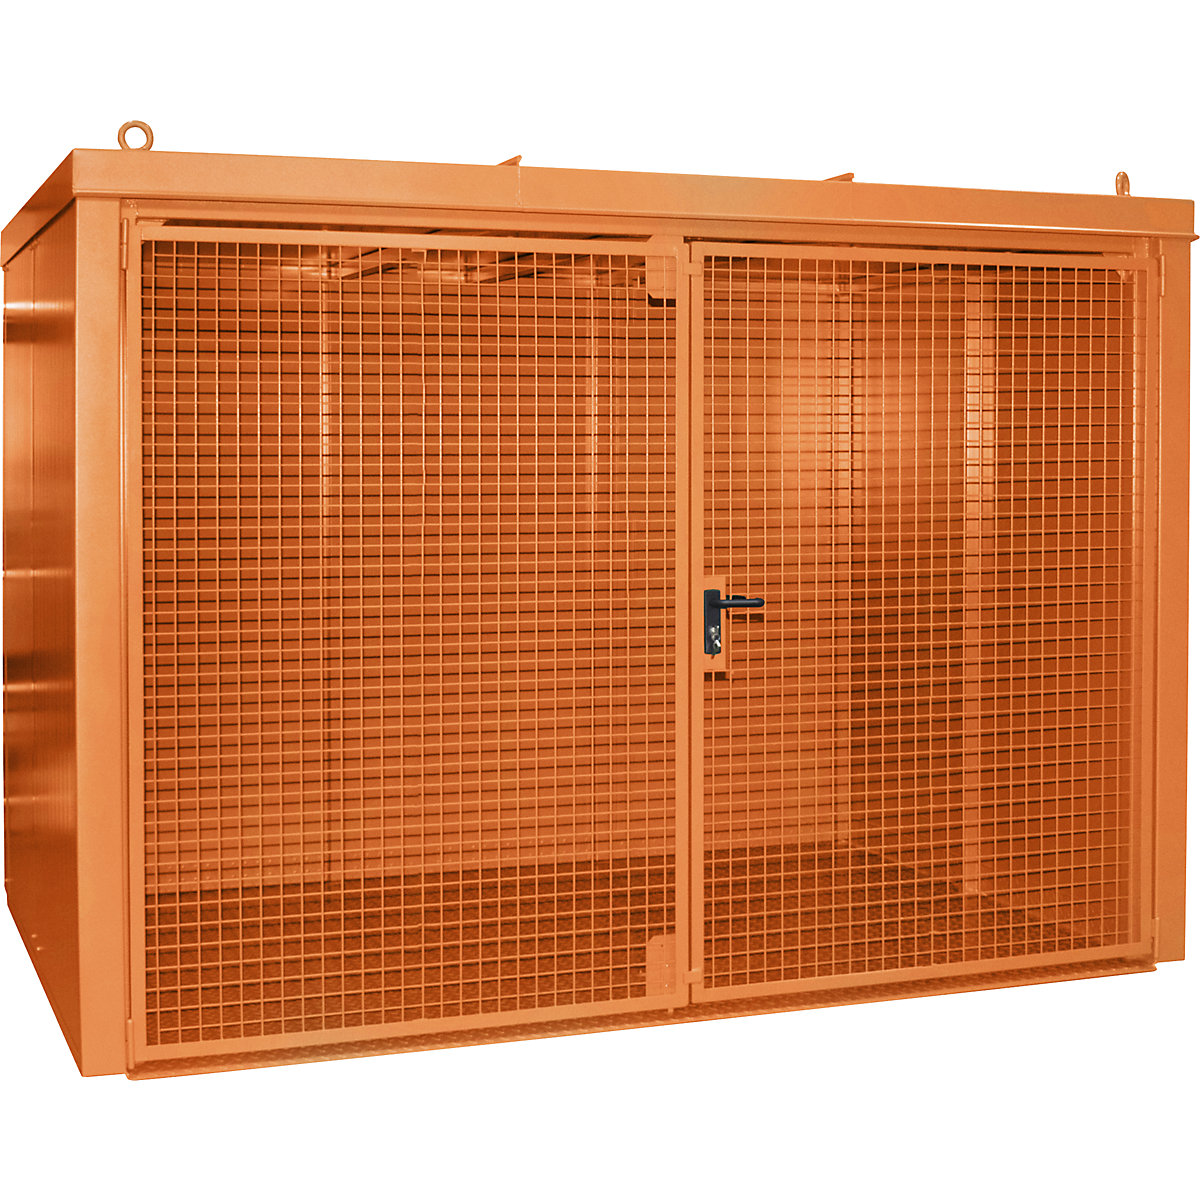 Gas cylinder container, fire resistant – eurokraft pro, for 96 cylinders with Ø 230 mm, orange-6